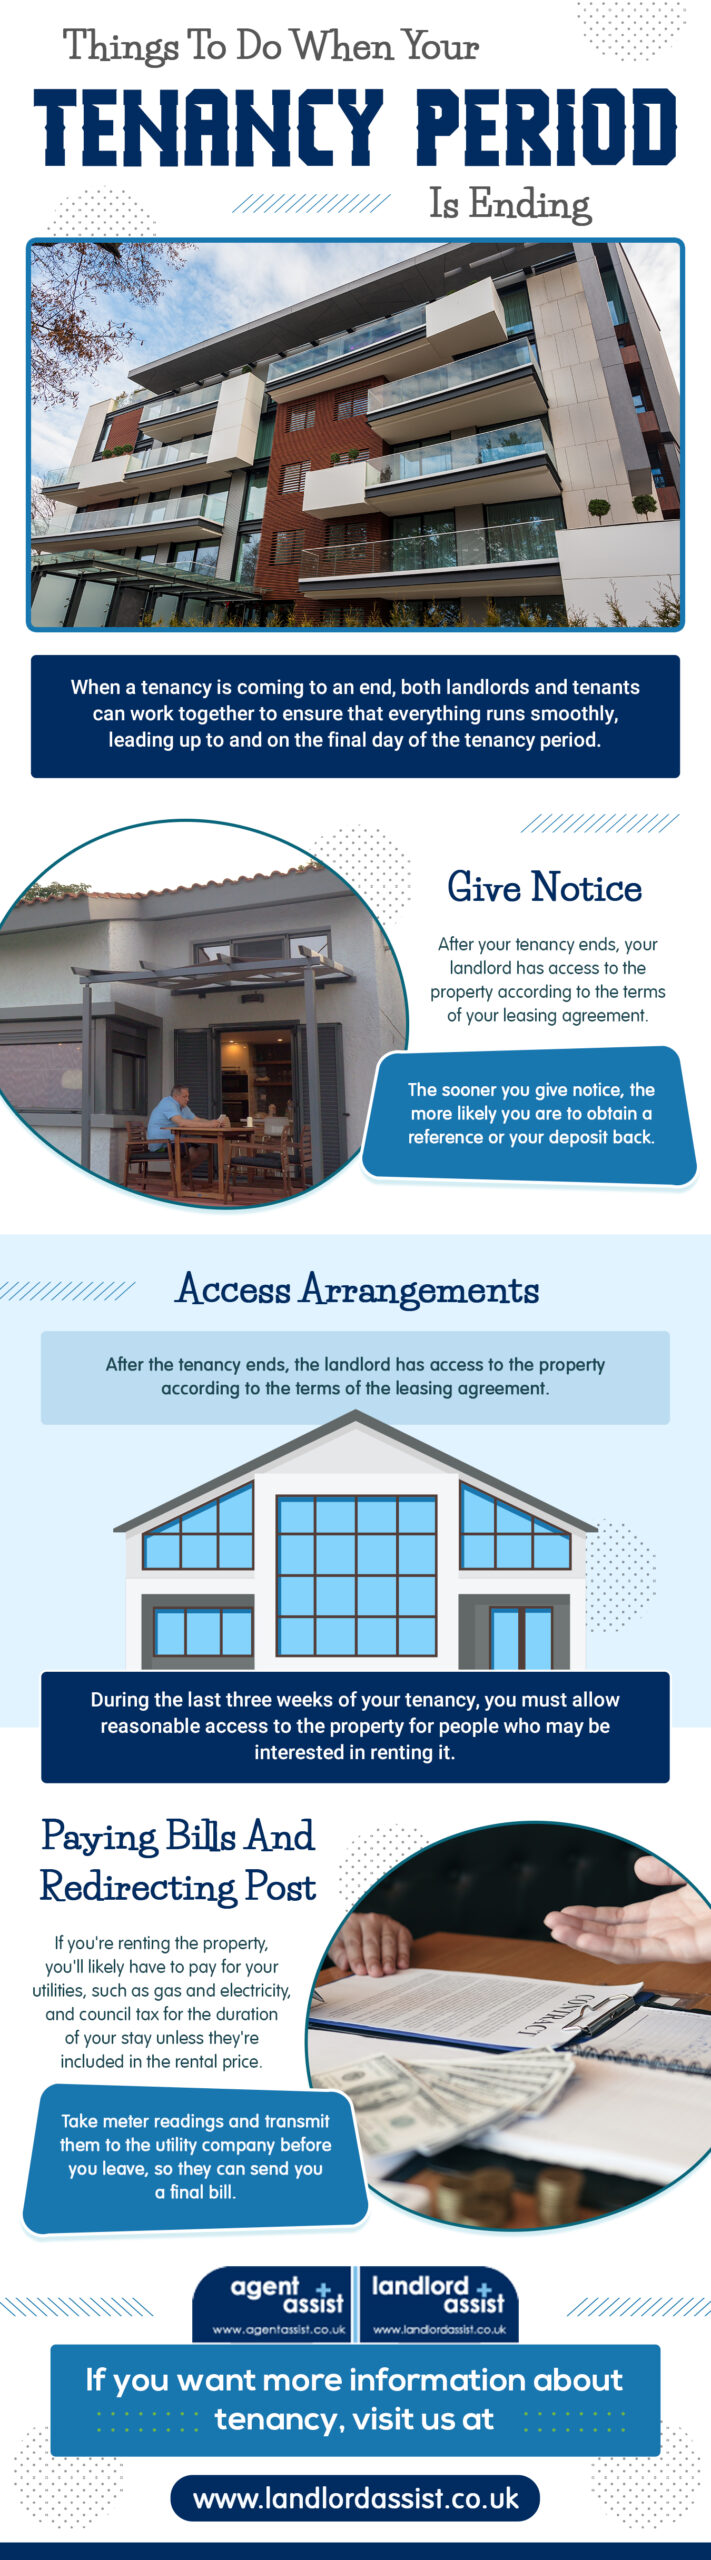 Things To Do When Your Tenancy Period Is Ending - Infograph